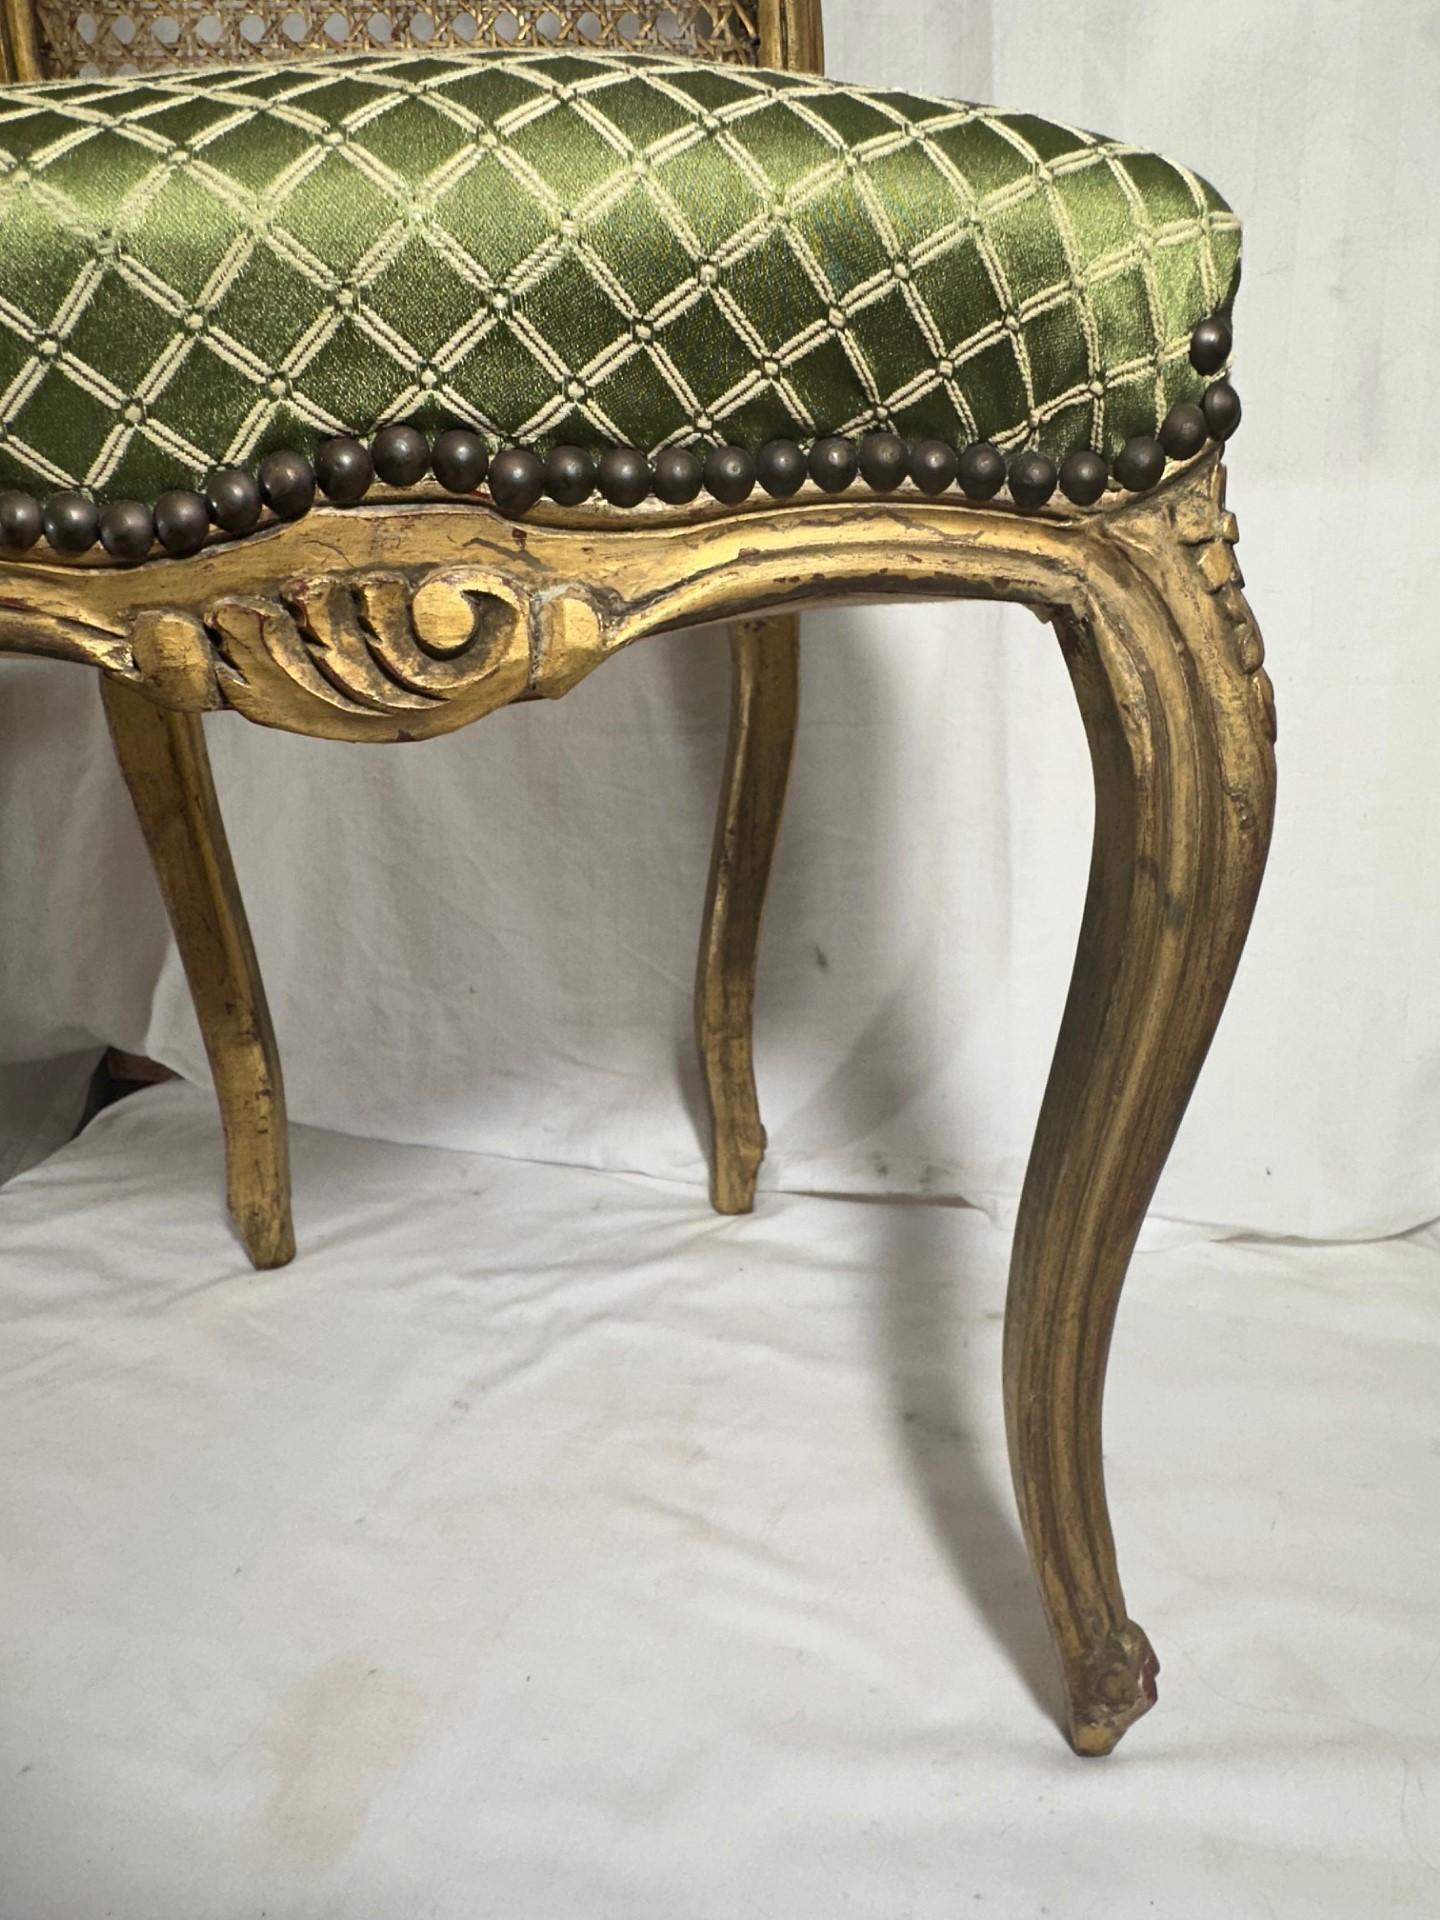 20th Century Rococo Style Giltwood Cane Chair with Upholstered Seat, Side Chair.y For Sale